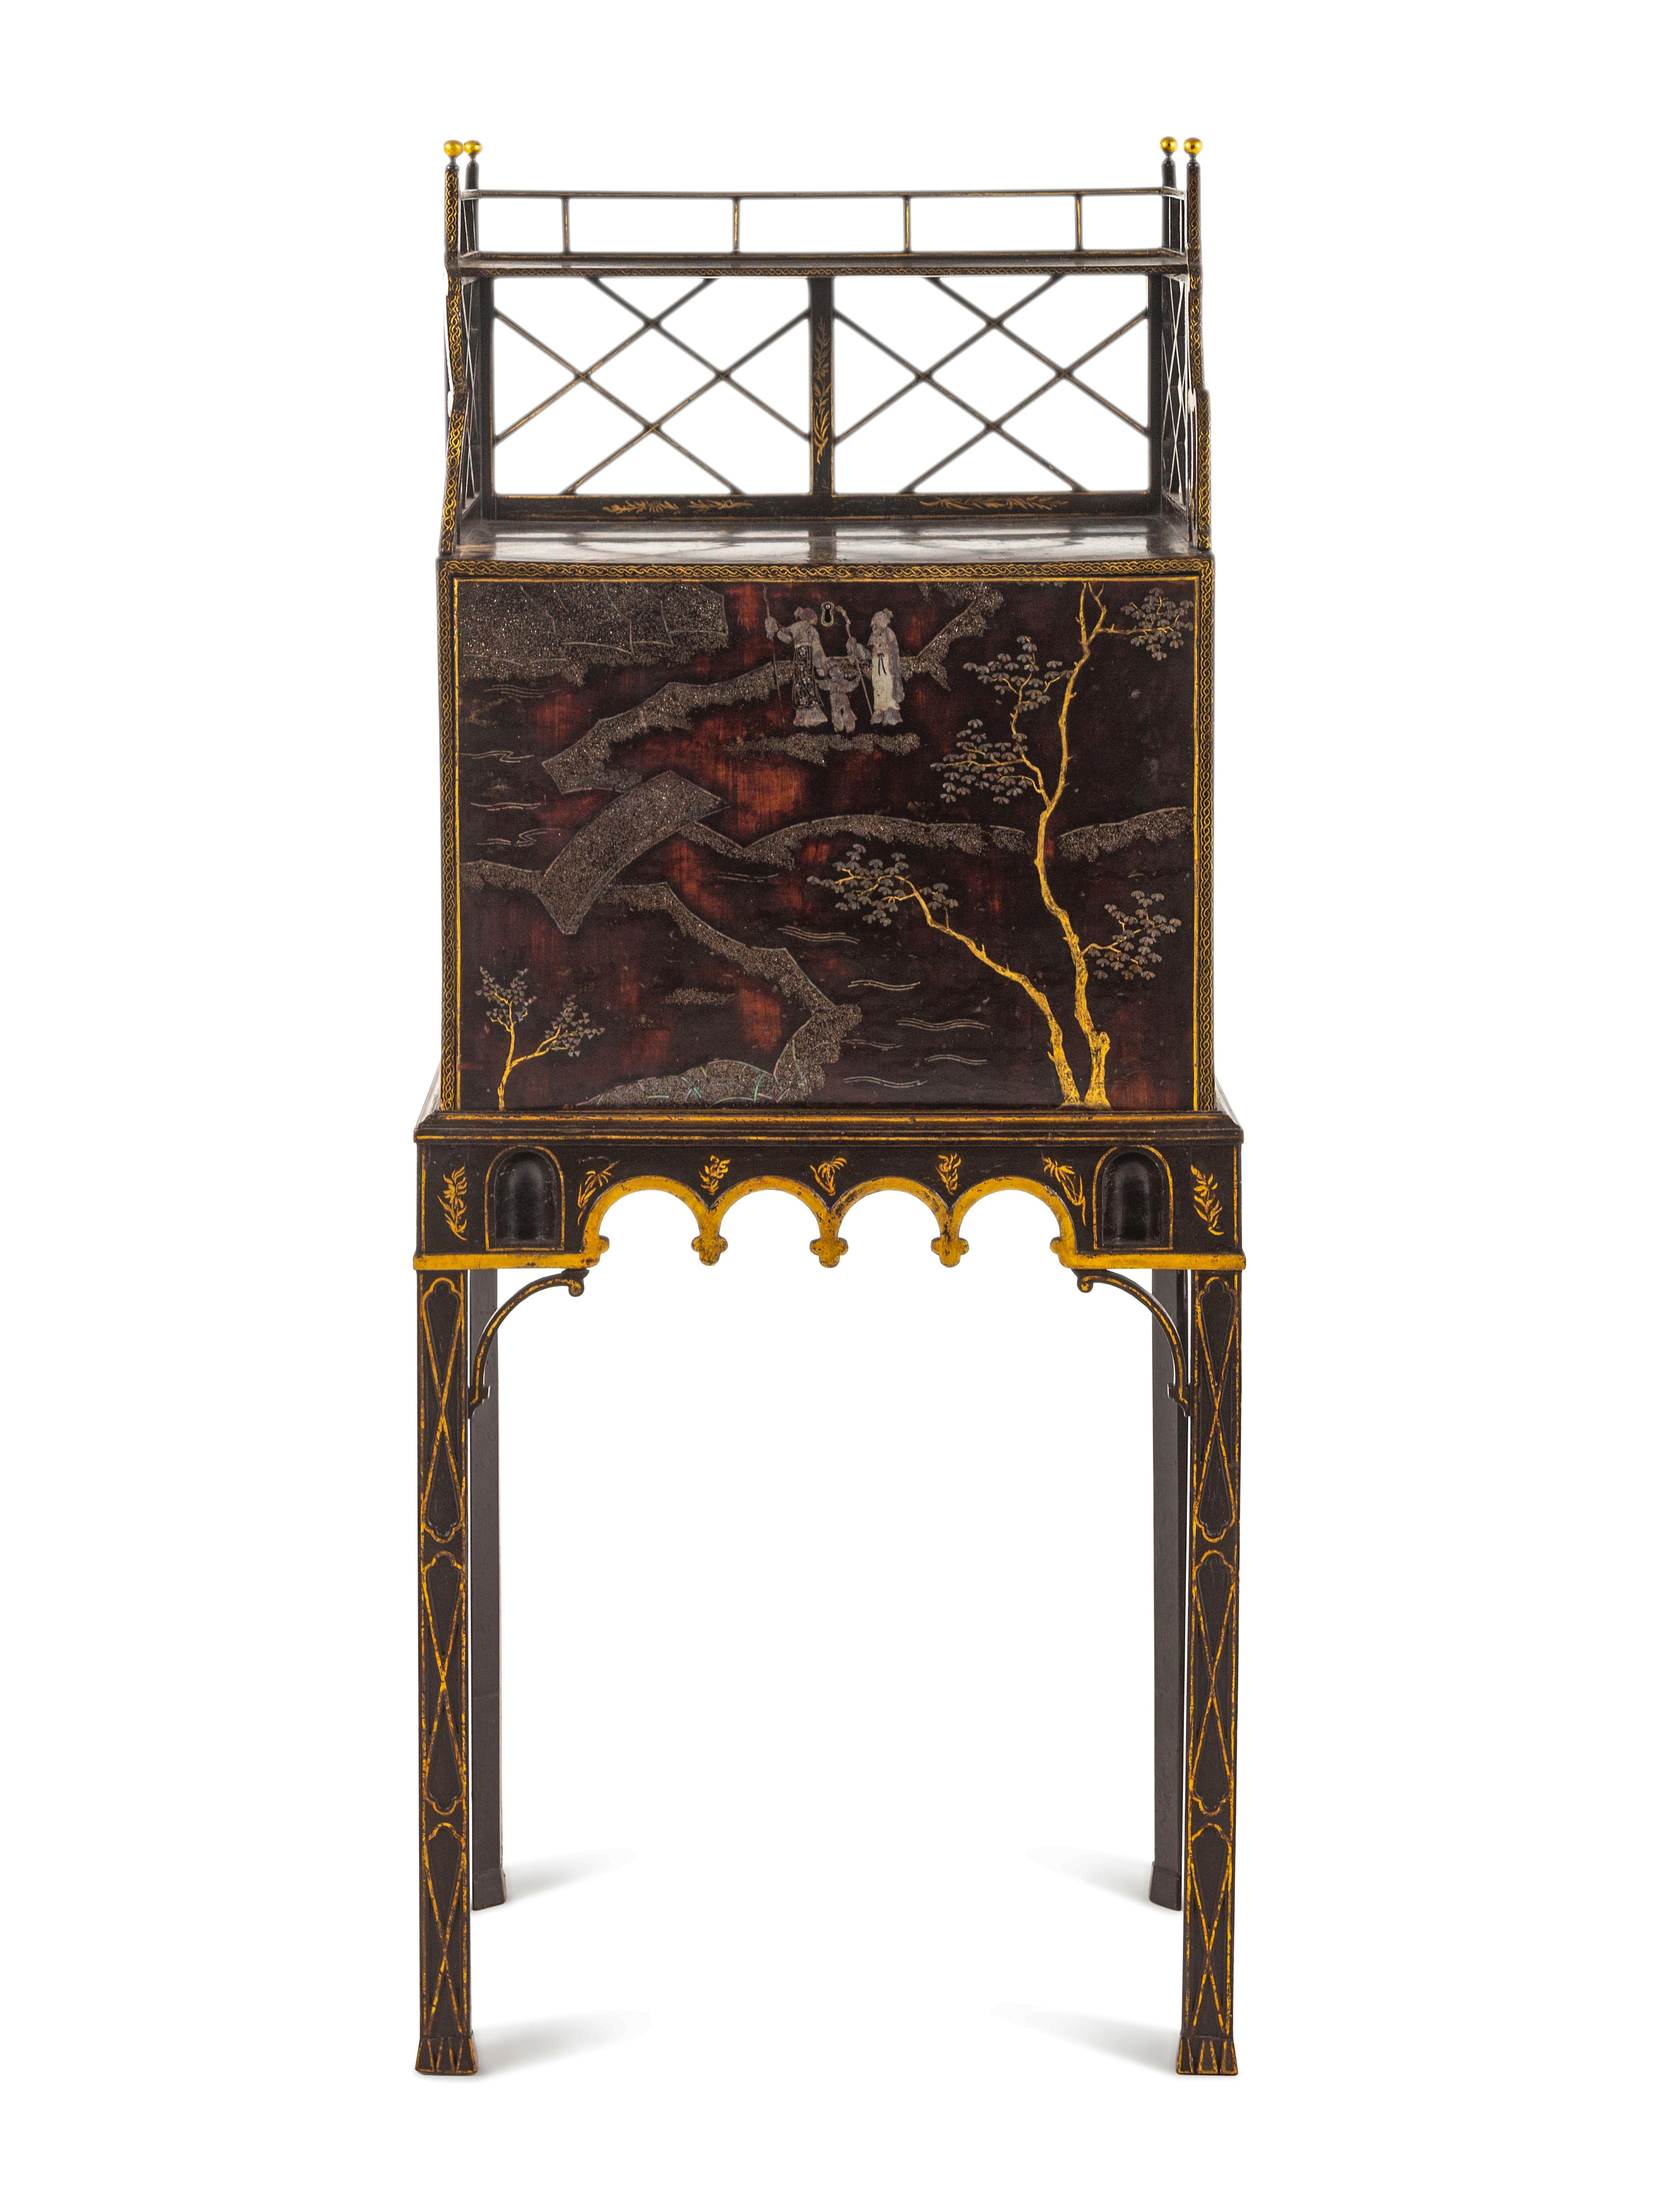 A George III 'Lac Bergaute' and Black and Gilt-Japanned Secretaire Cabinet-on-Stand